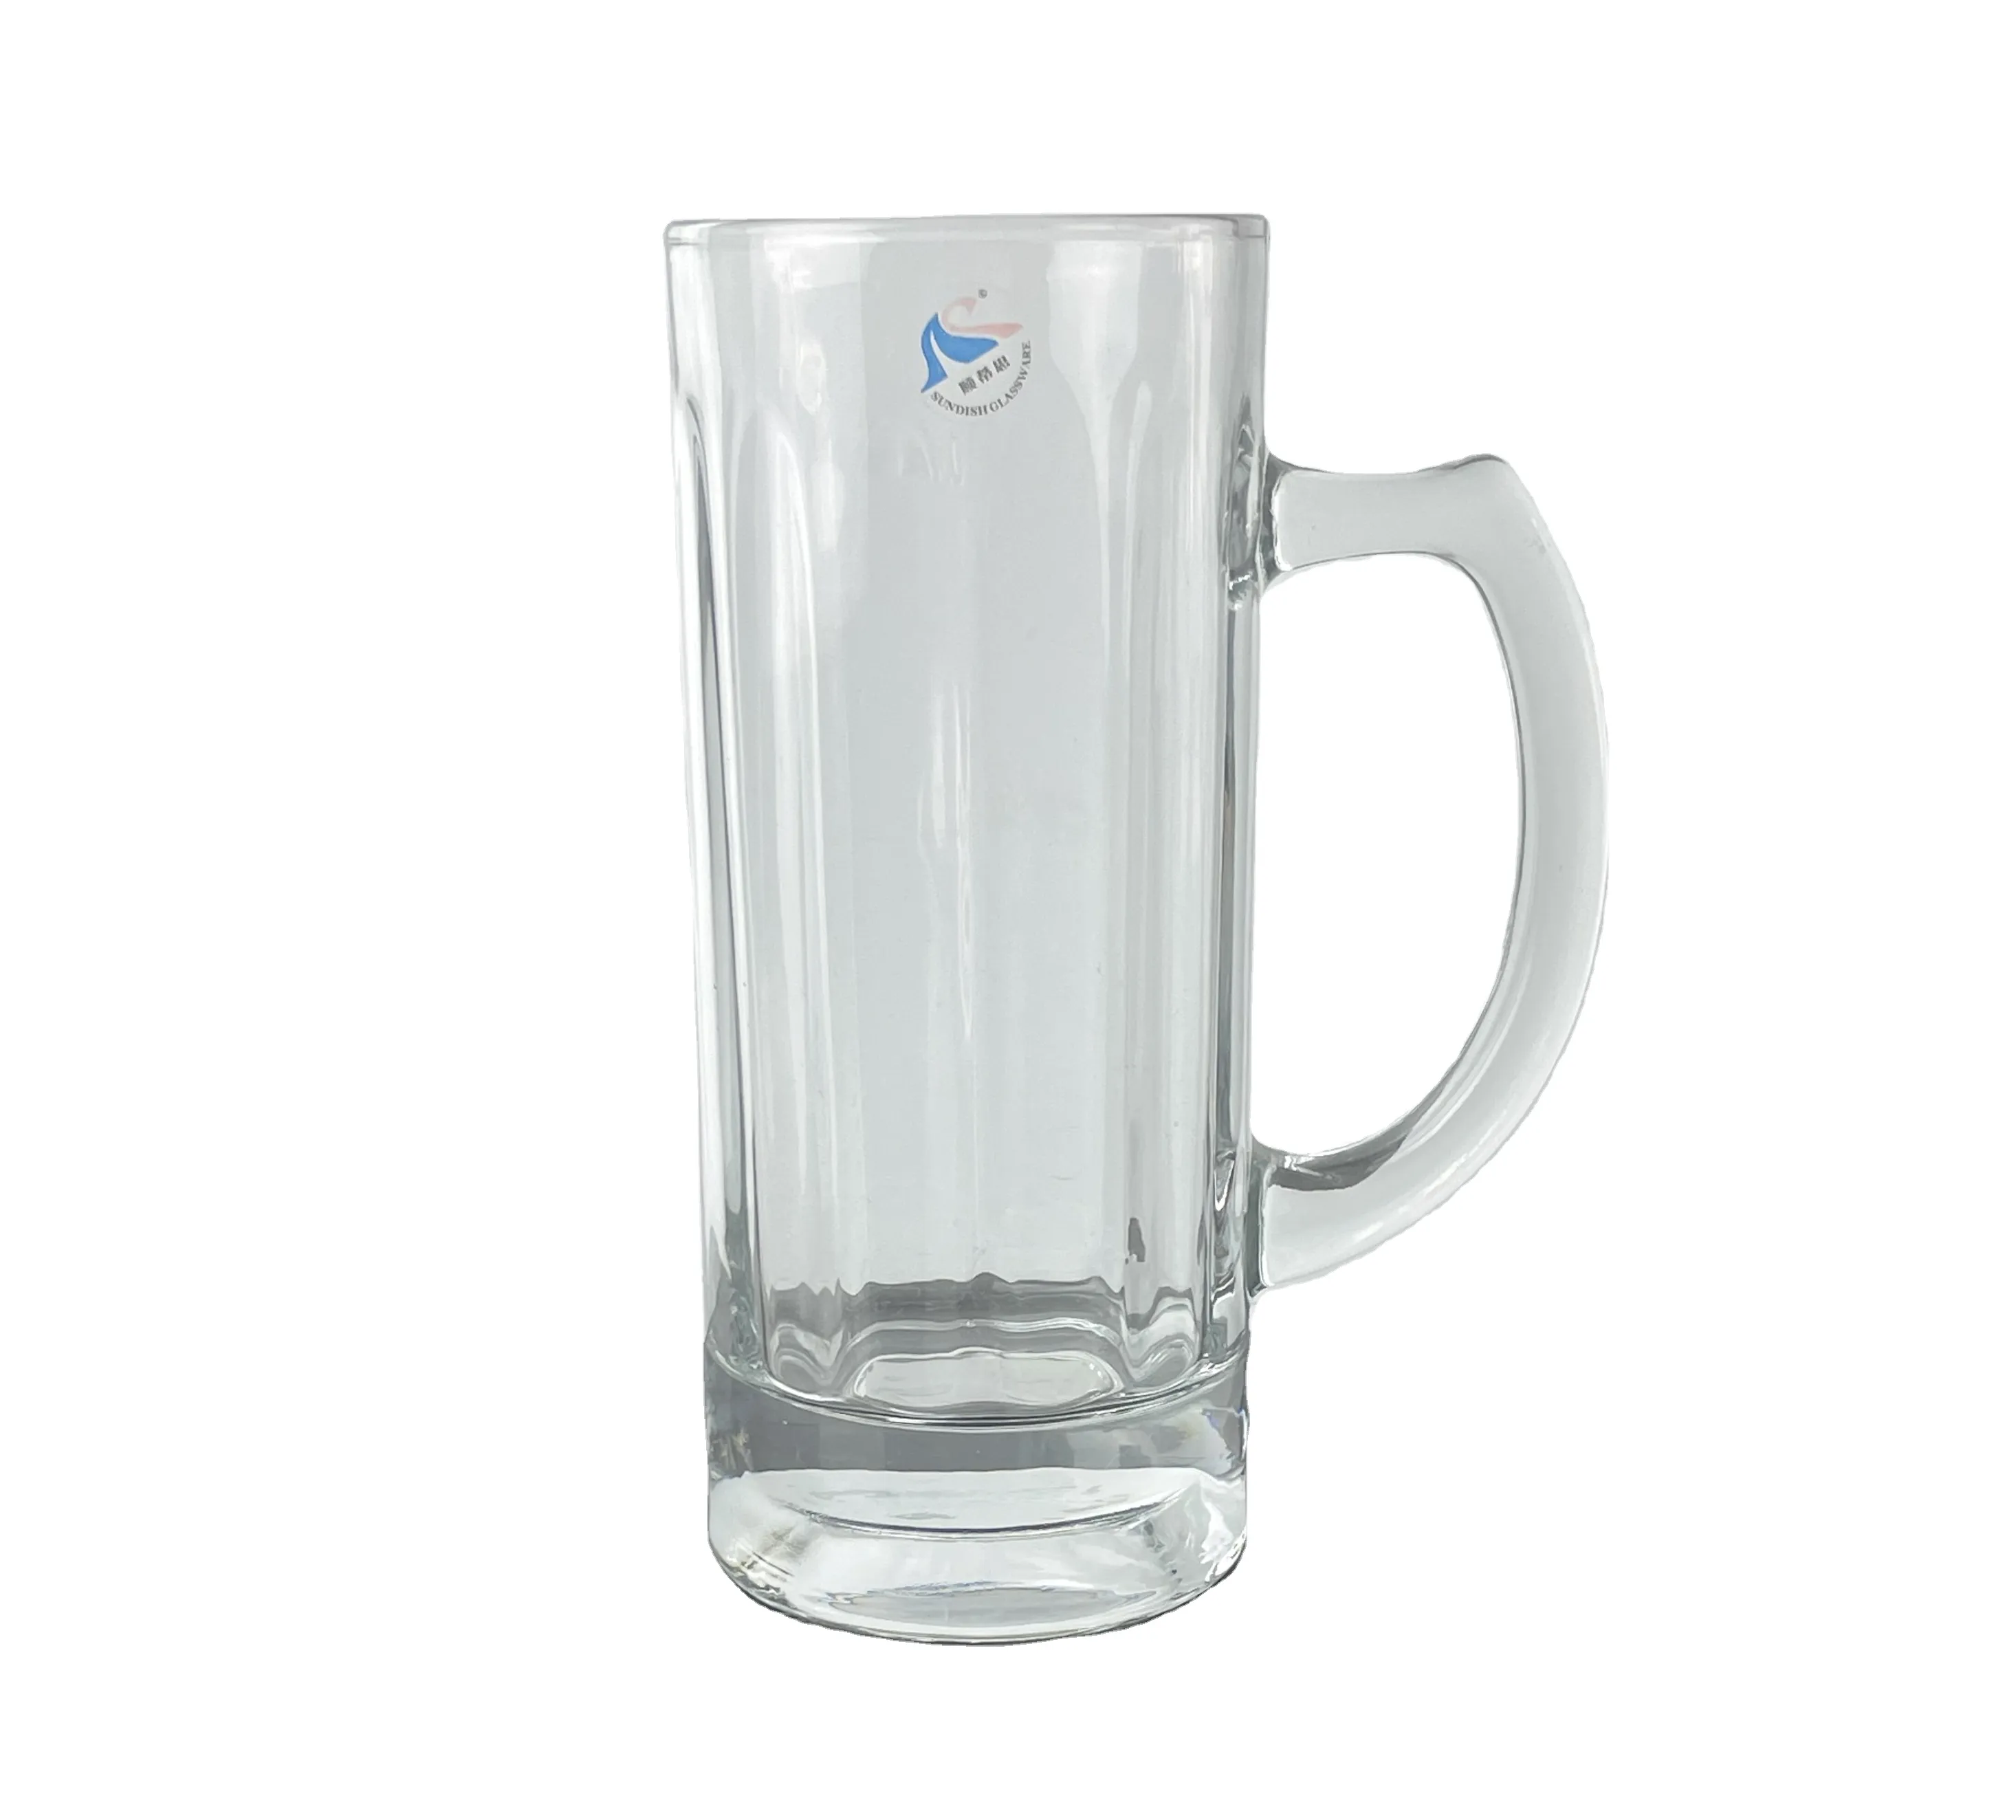 Beer Whisky Wine Water Glass Highball Tasting drinking Mugs Transparent high tall Cappuccino Coffee cup glassware